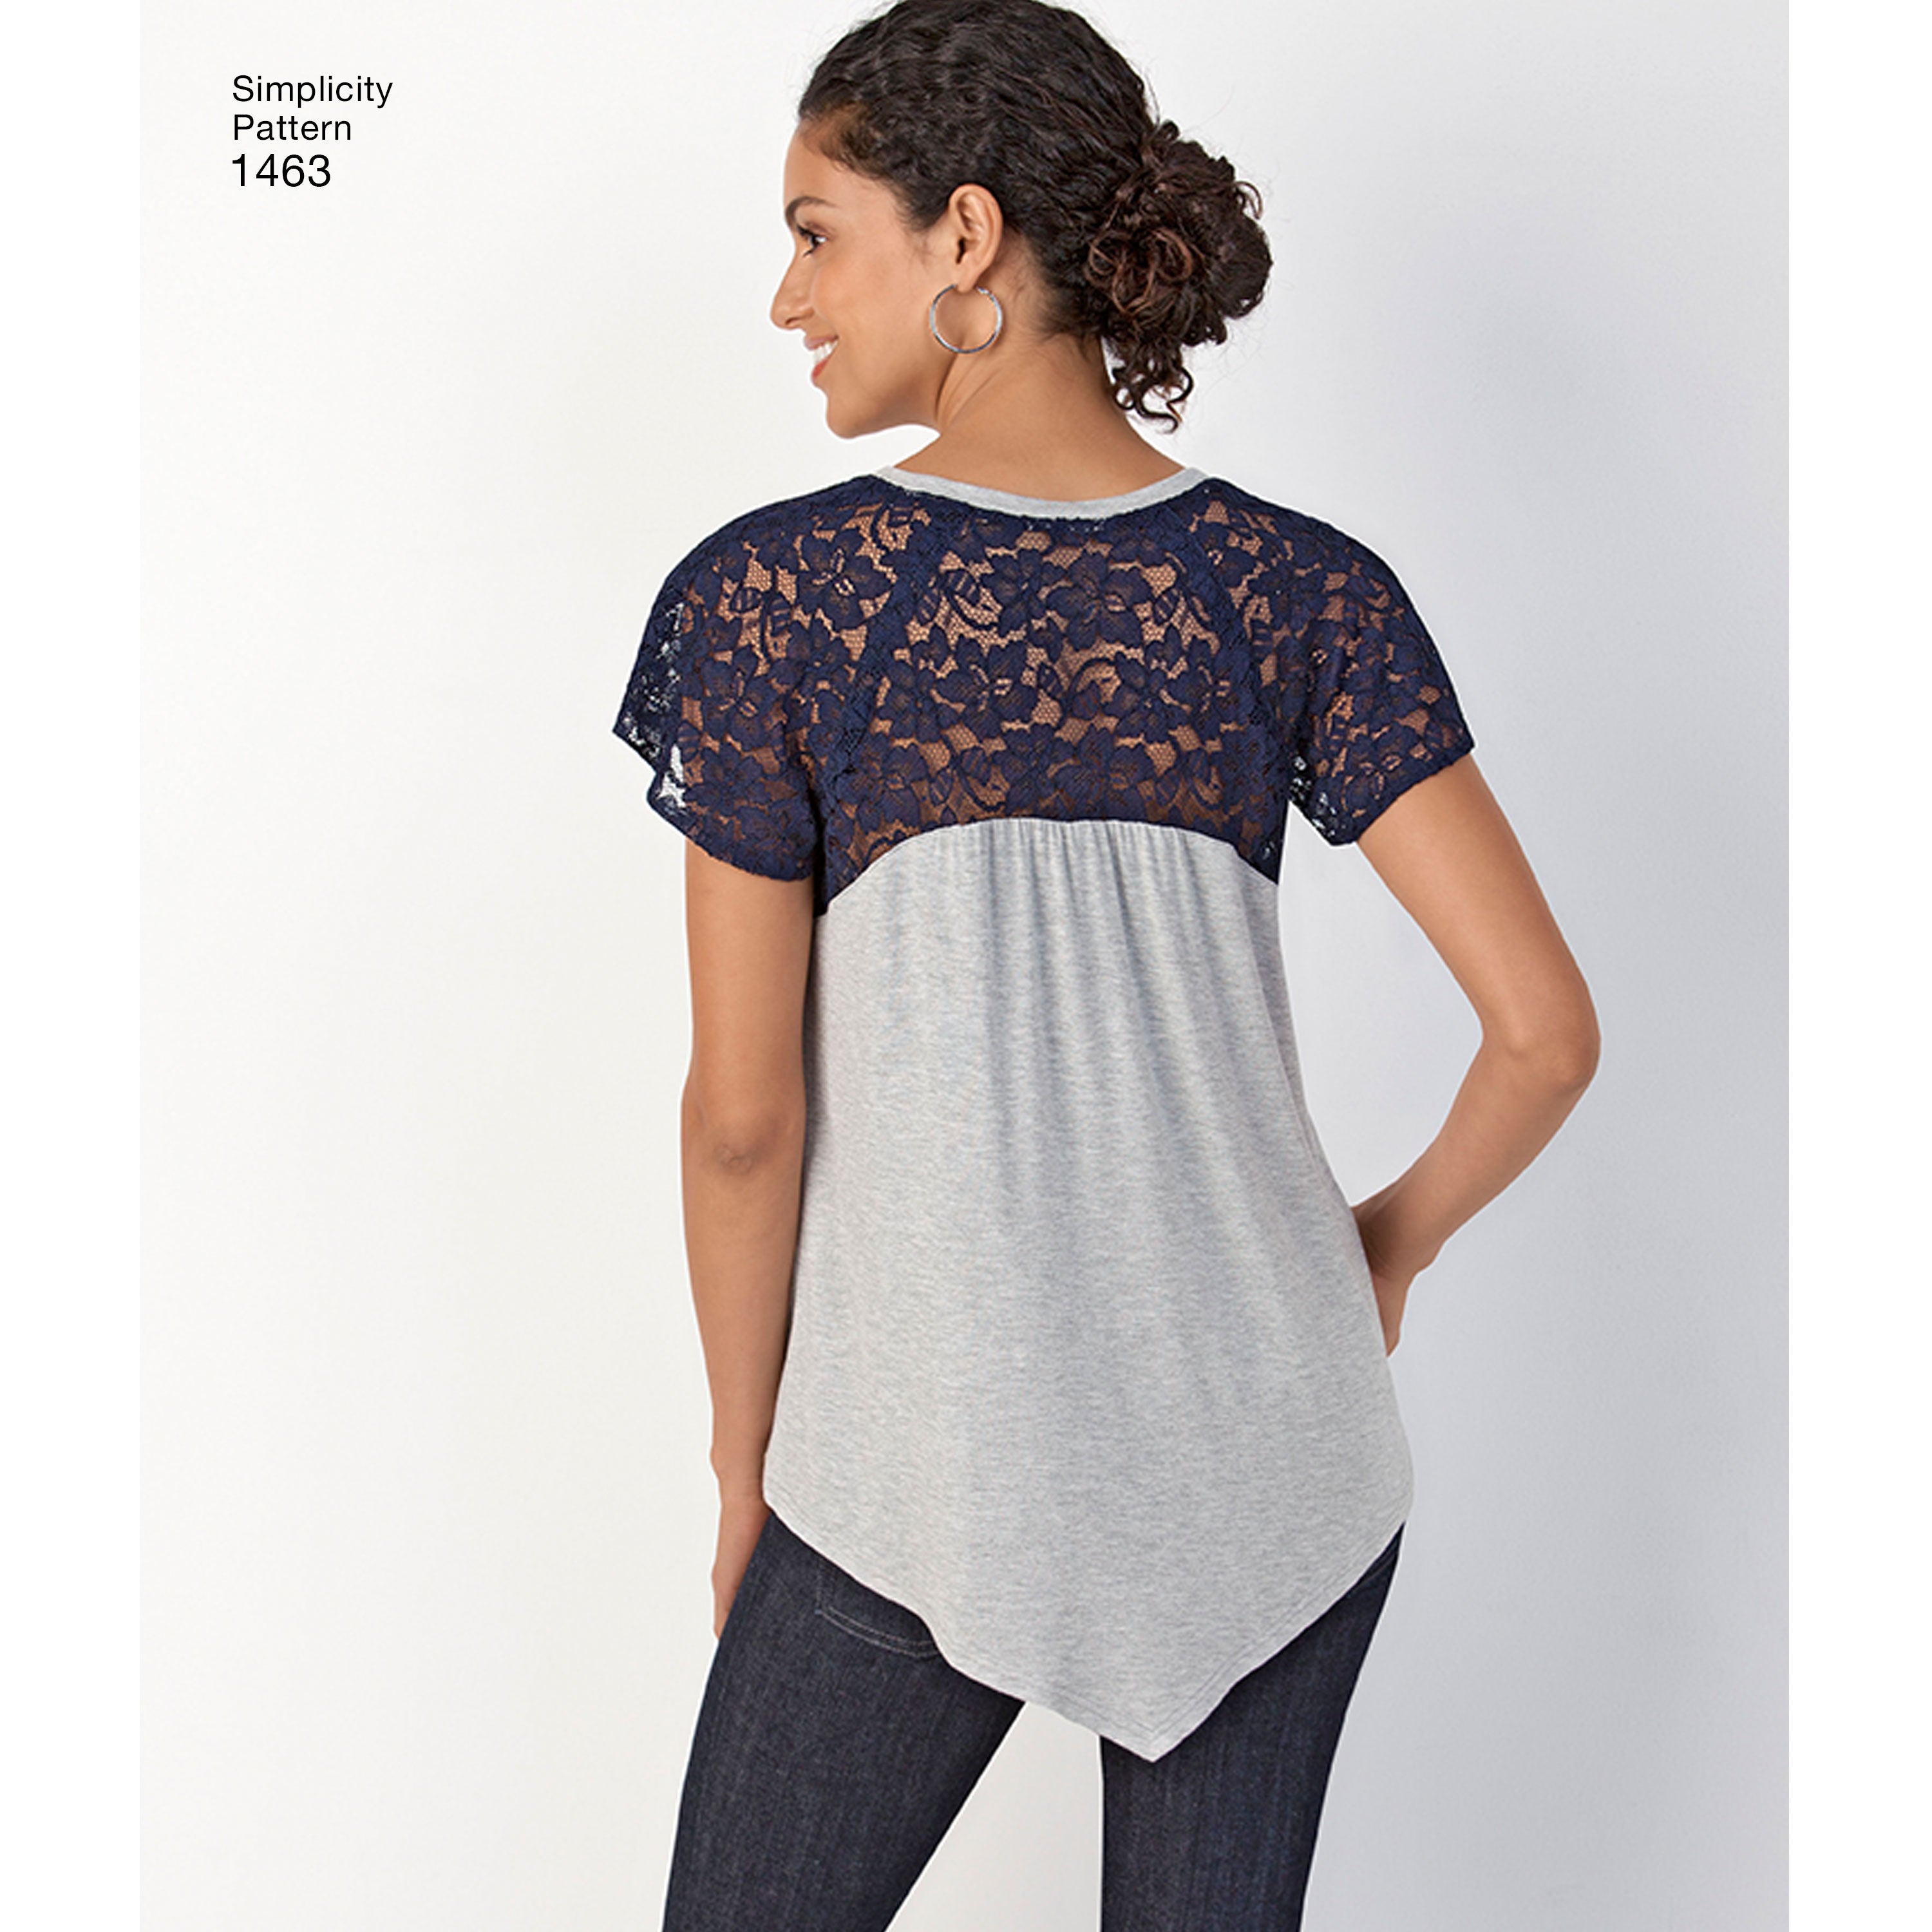 Simplicity Pattern 1463 Misses' Knit Tops from Jaycotts Sewing Supplies